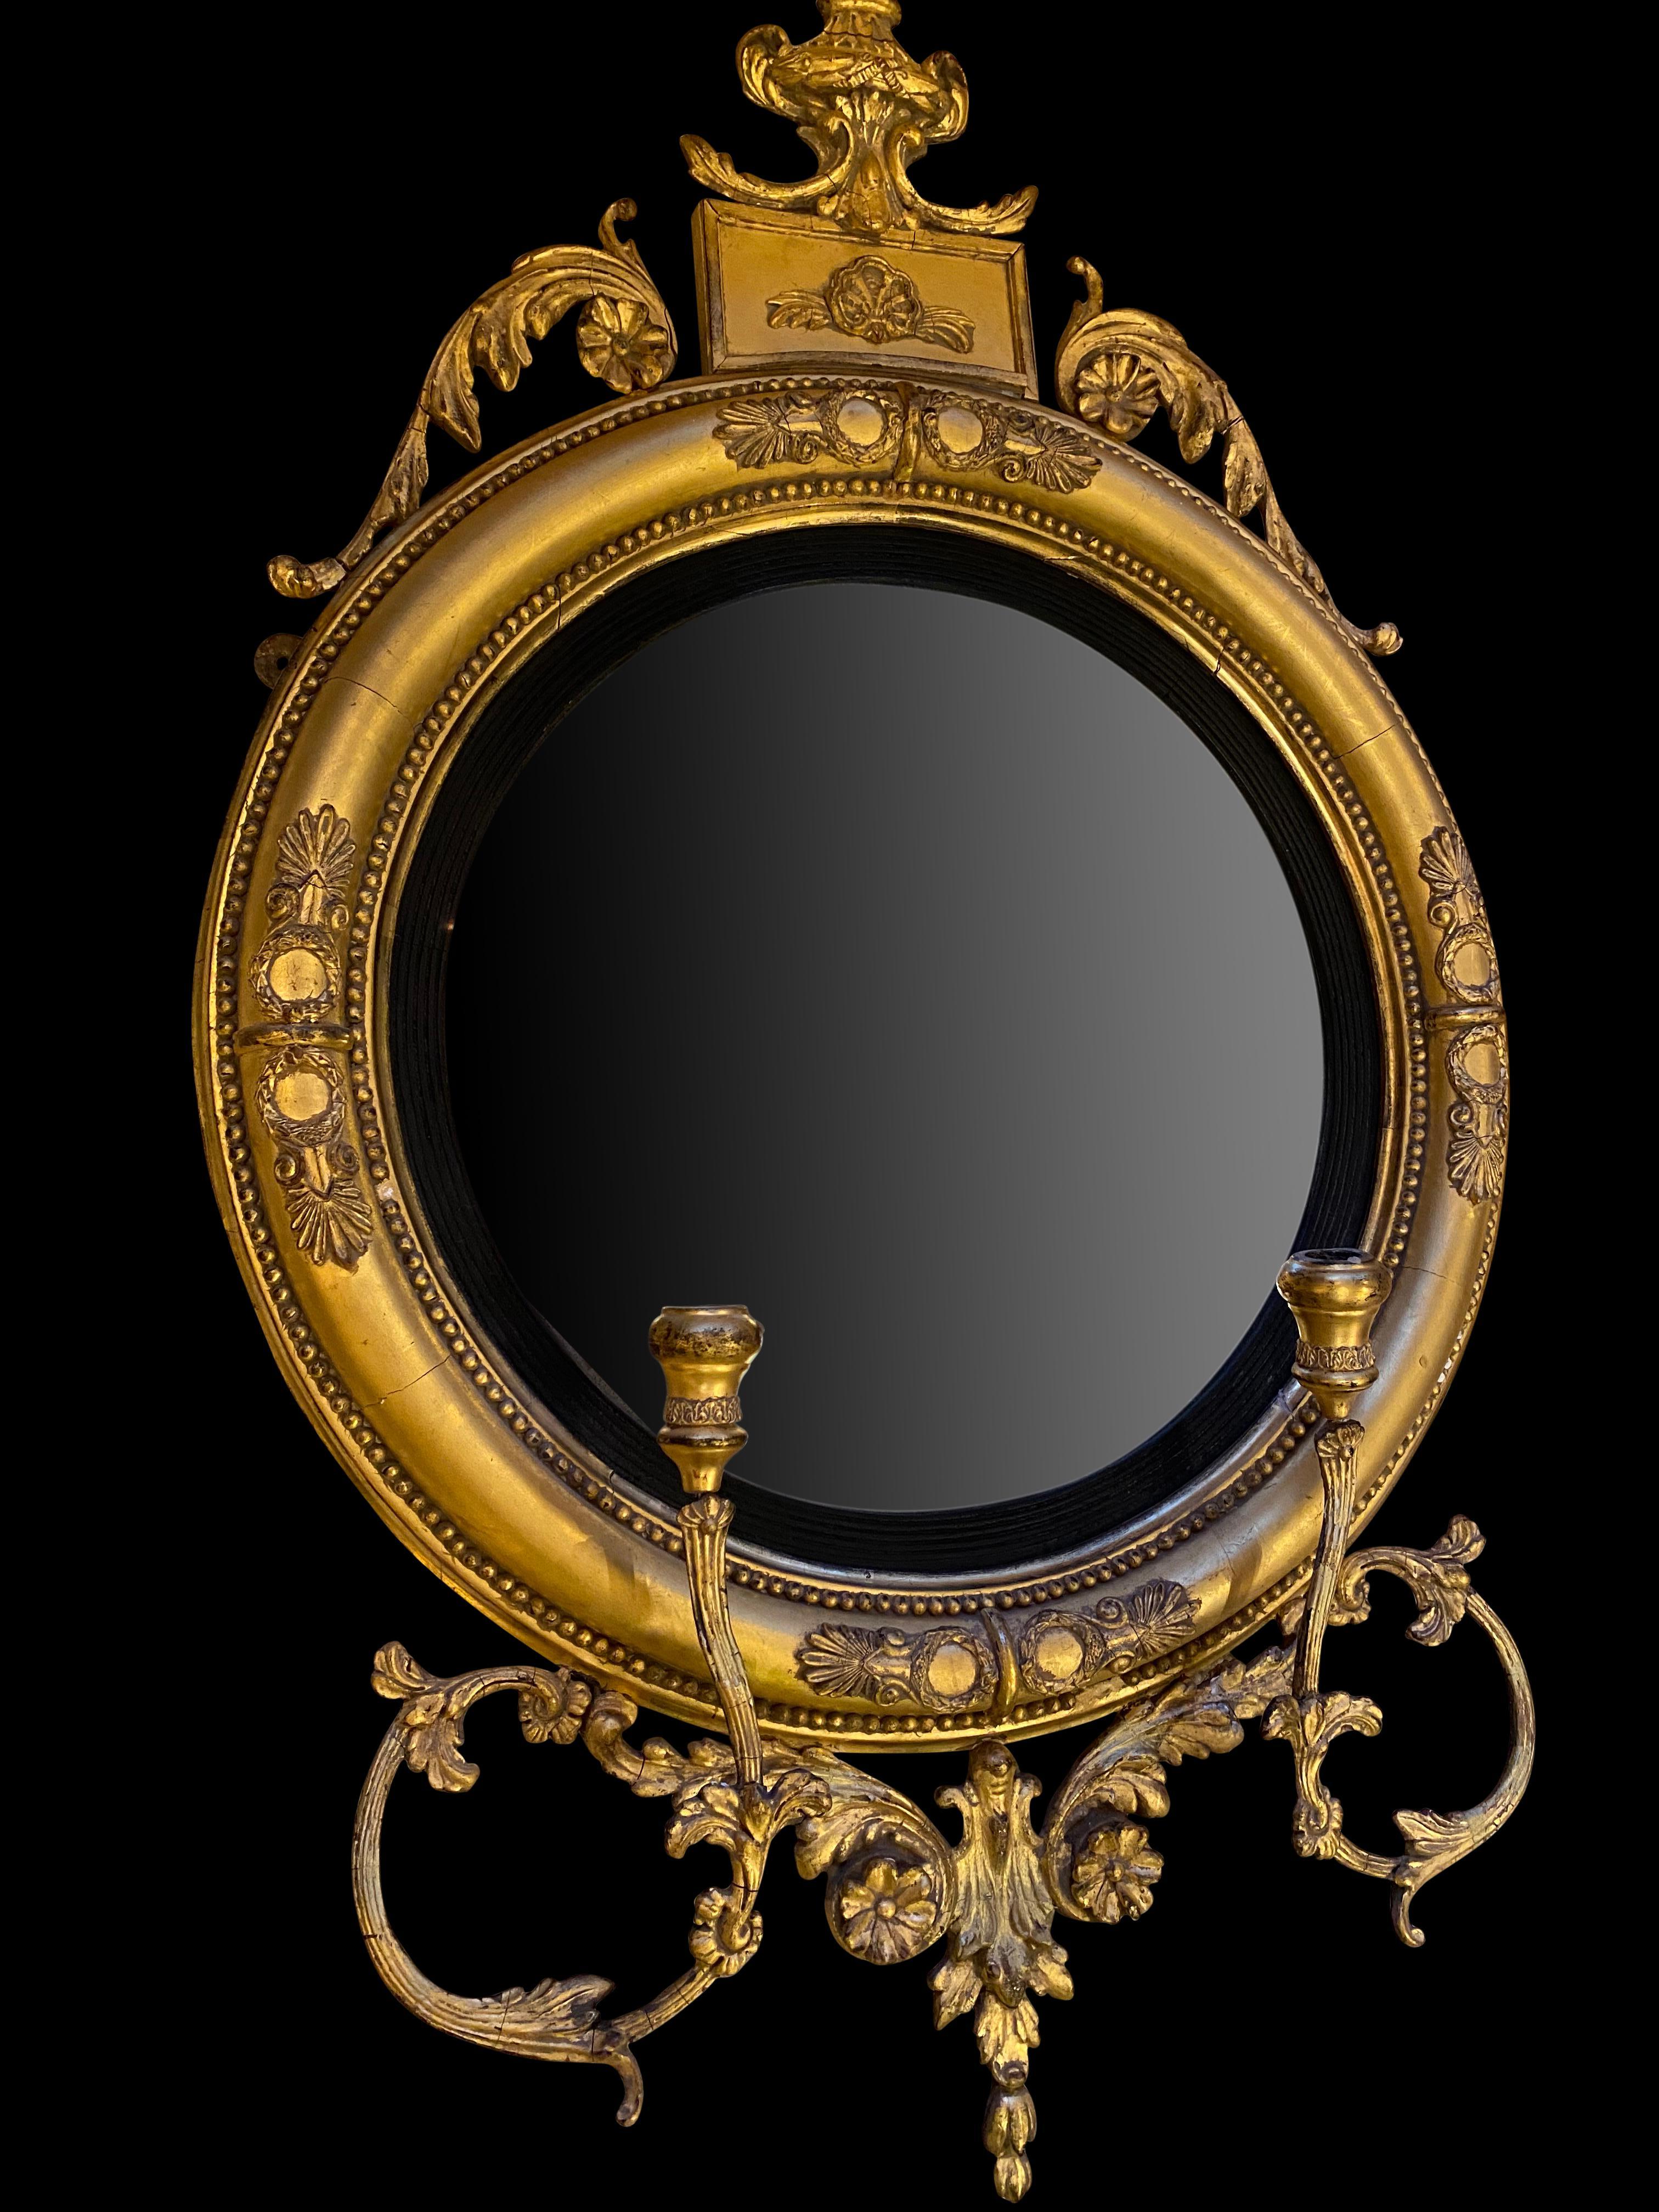 Fine Pair of Regency Convex Mirrors, English, circa 1820 For Sale 5